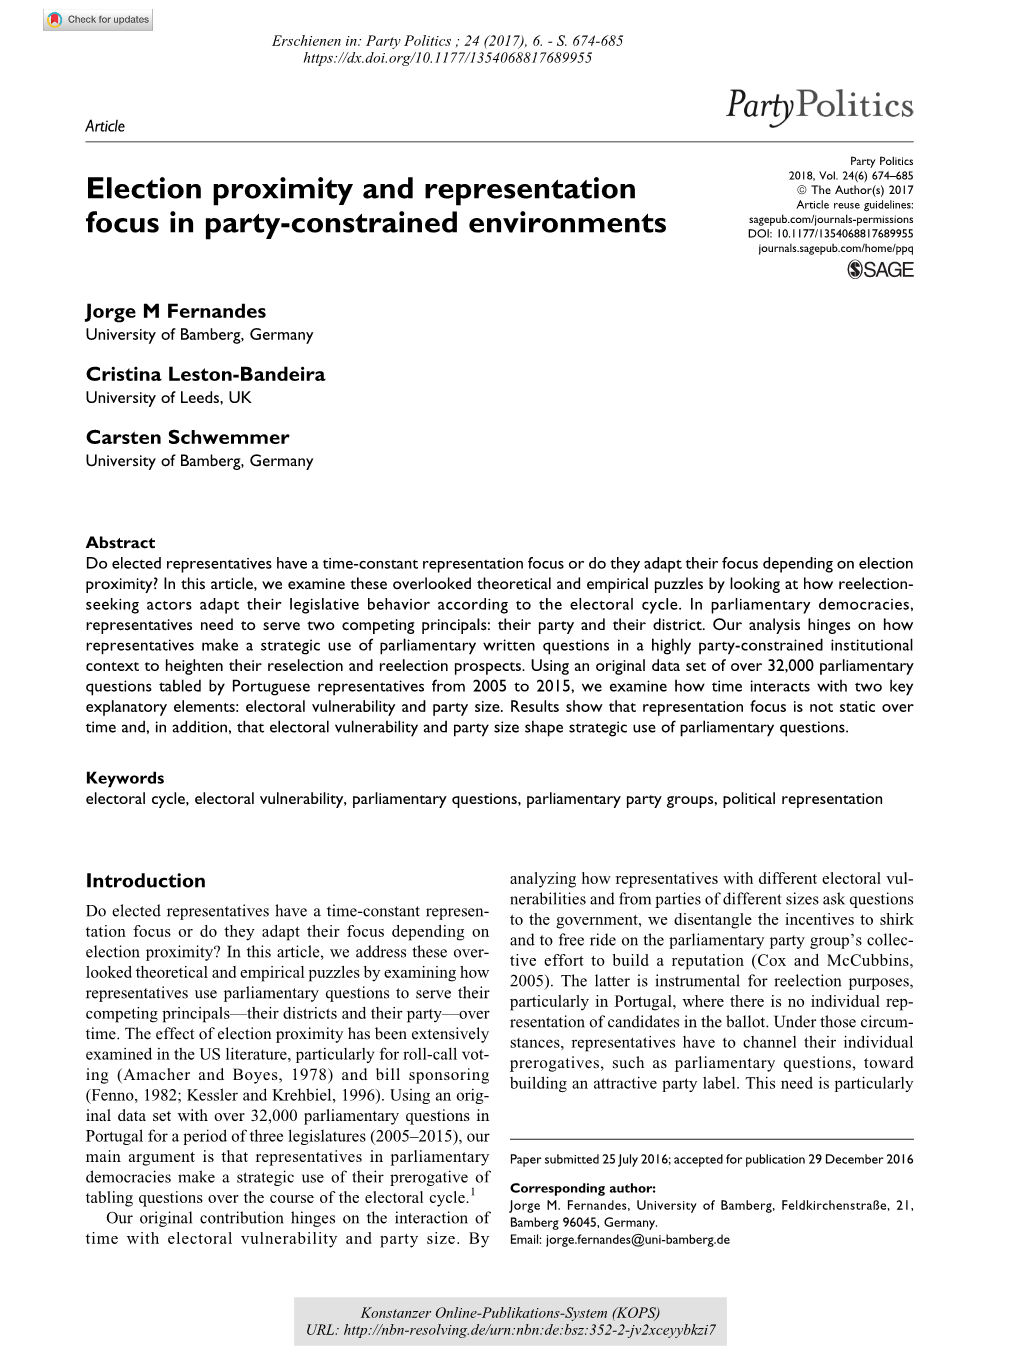 Election Proximity and Representation Focus in Party-Constrained